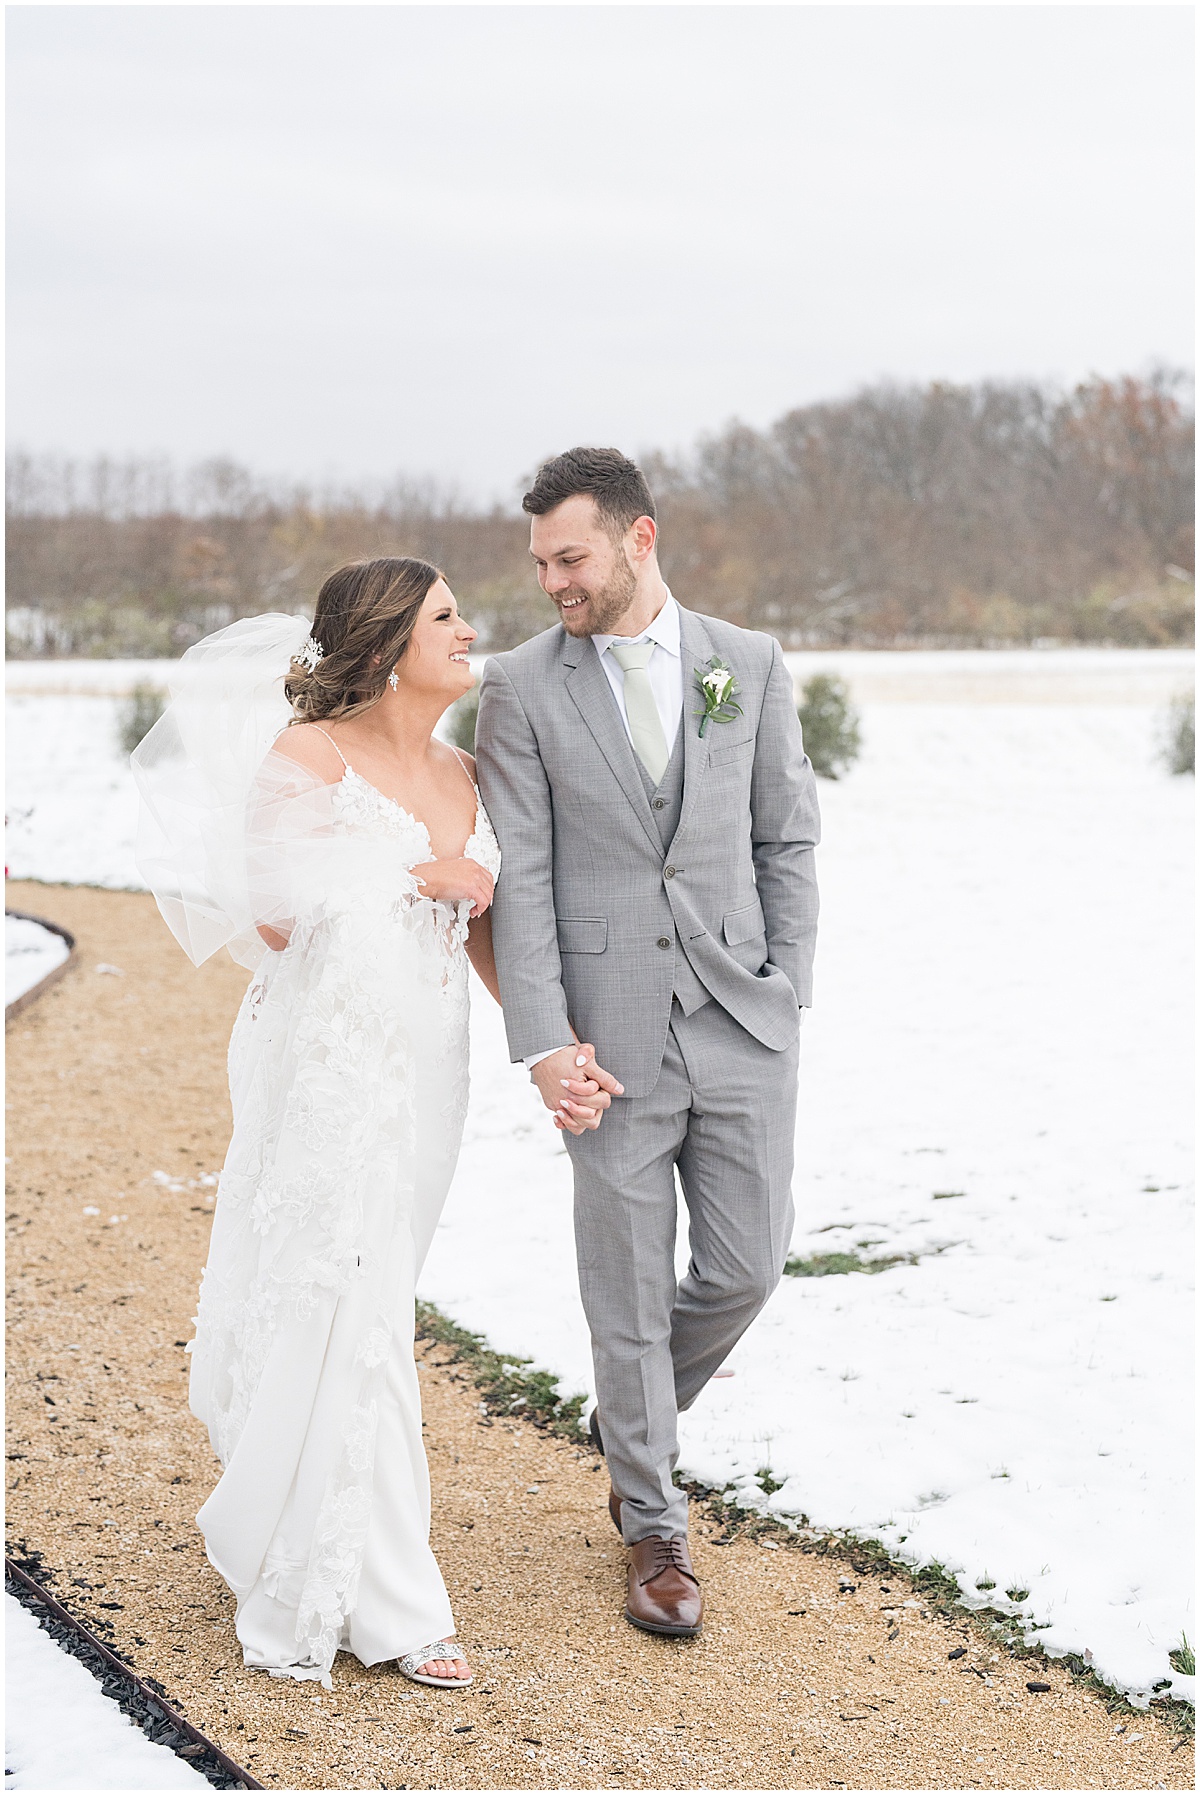 Bride and groom walk on path in snow after wedding at New Journey Farms in Lafayette, Indiana photographed by Victoria Rayburn Photography